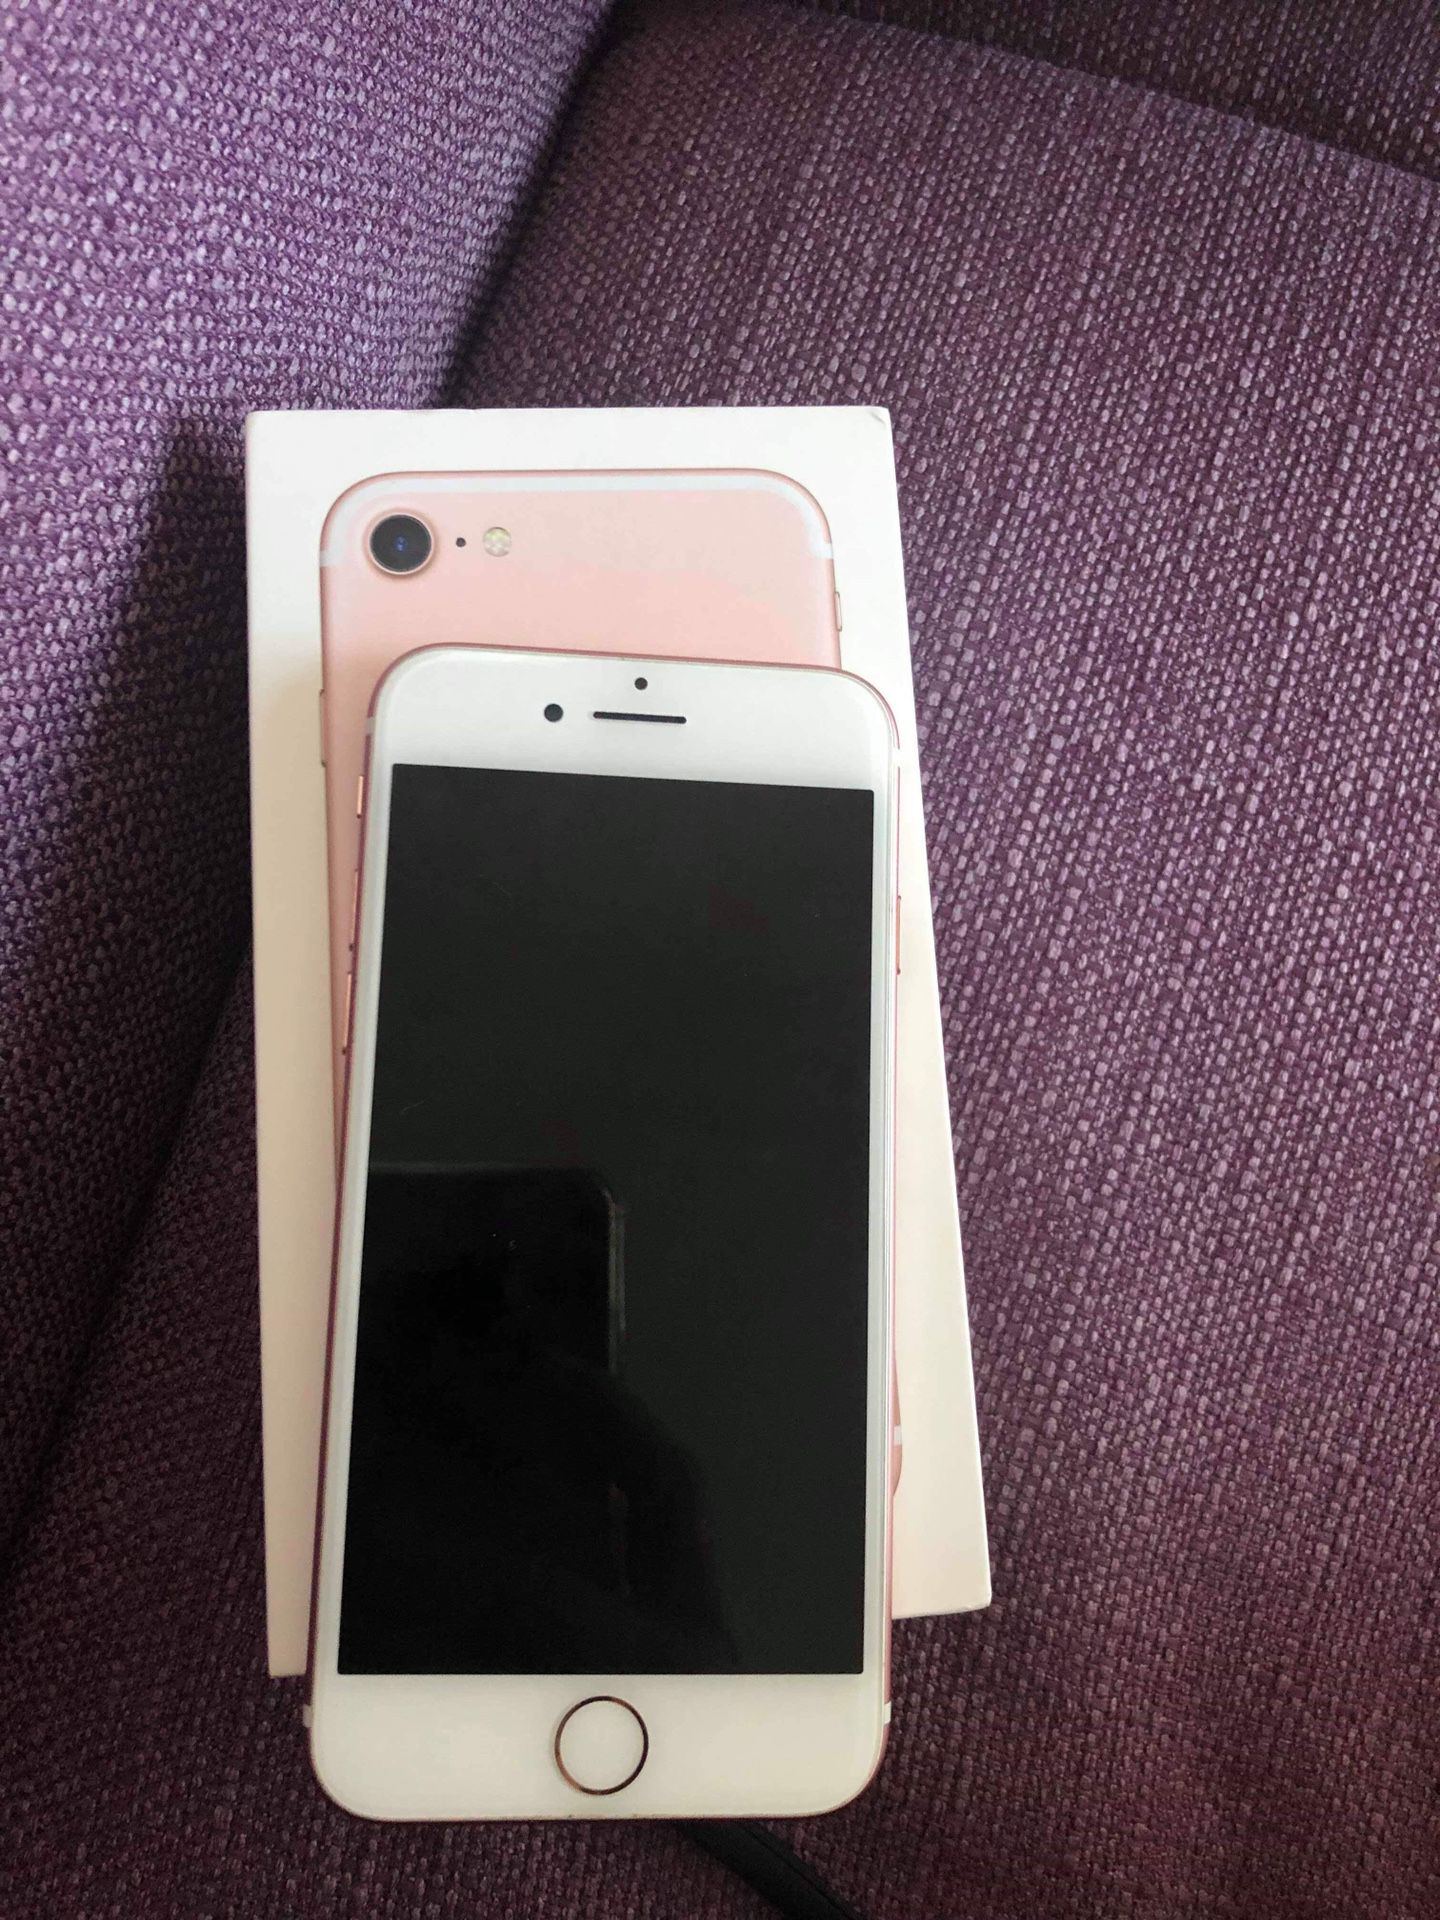 iphone 7 rose gold almost new 32gb Unlocked